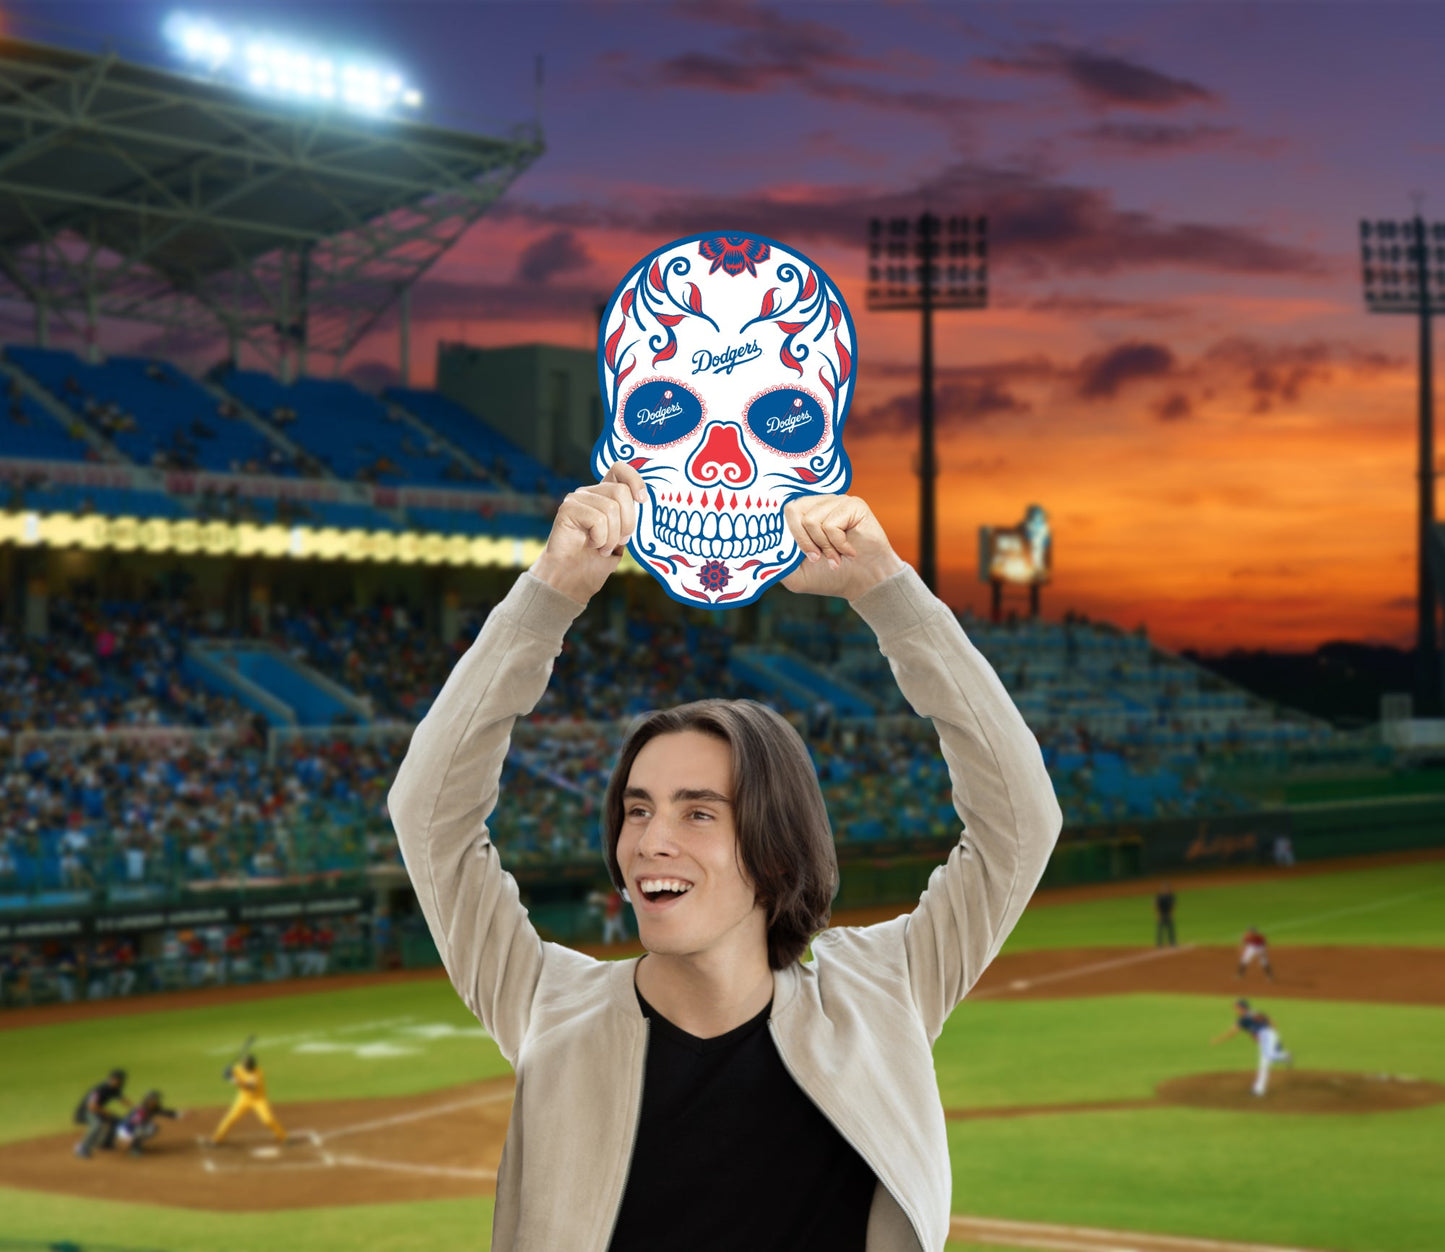 Los Angeles Dodgers: Skull Foam Core Cutout - Officially Licensed MLB Big Head